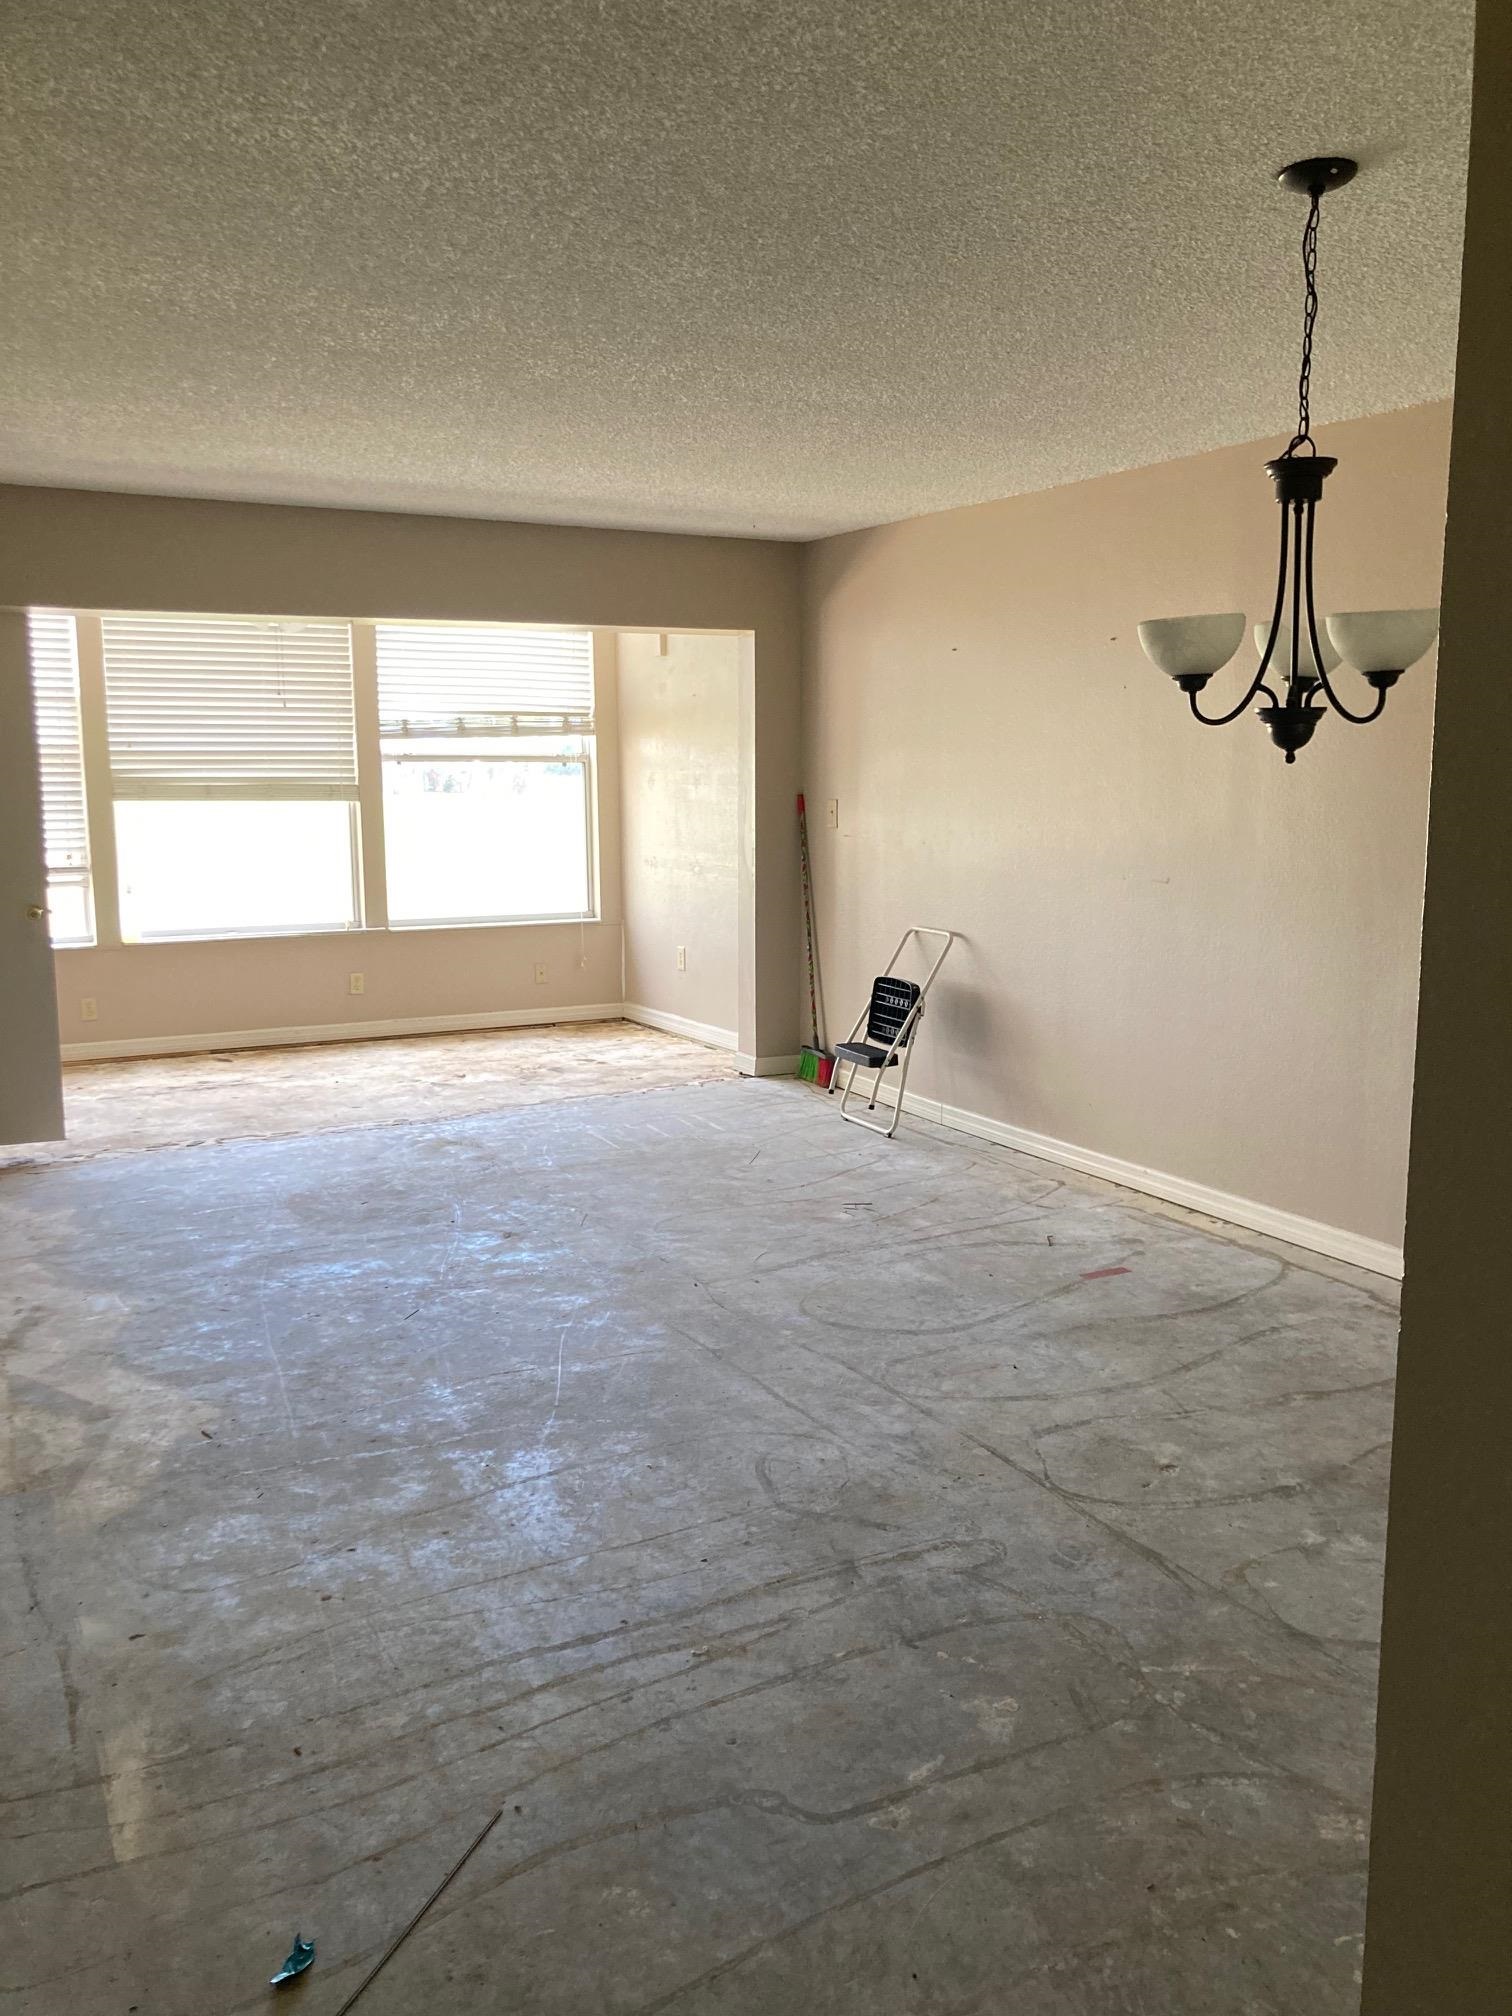 1740 Pine Valley Drive, Fort Myers, Florida 33907, 2 Bedrooms Bedrooms, ,1 BathroomBathrooms,Condo,For Sale,Pine Valley Drive,2230711